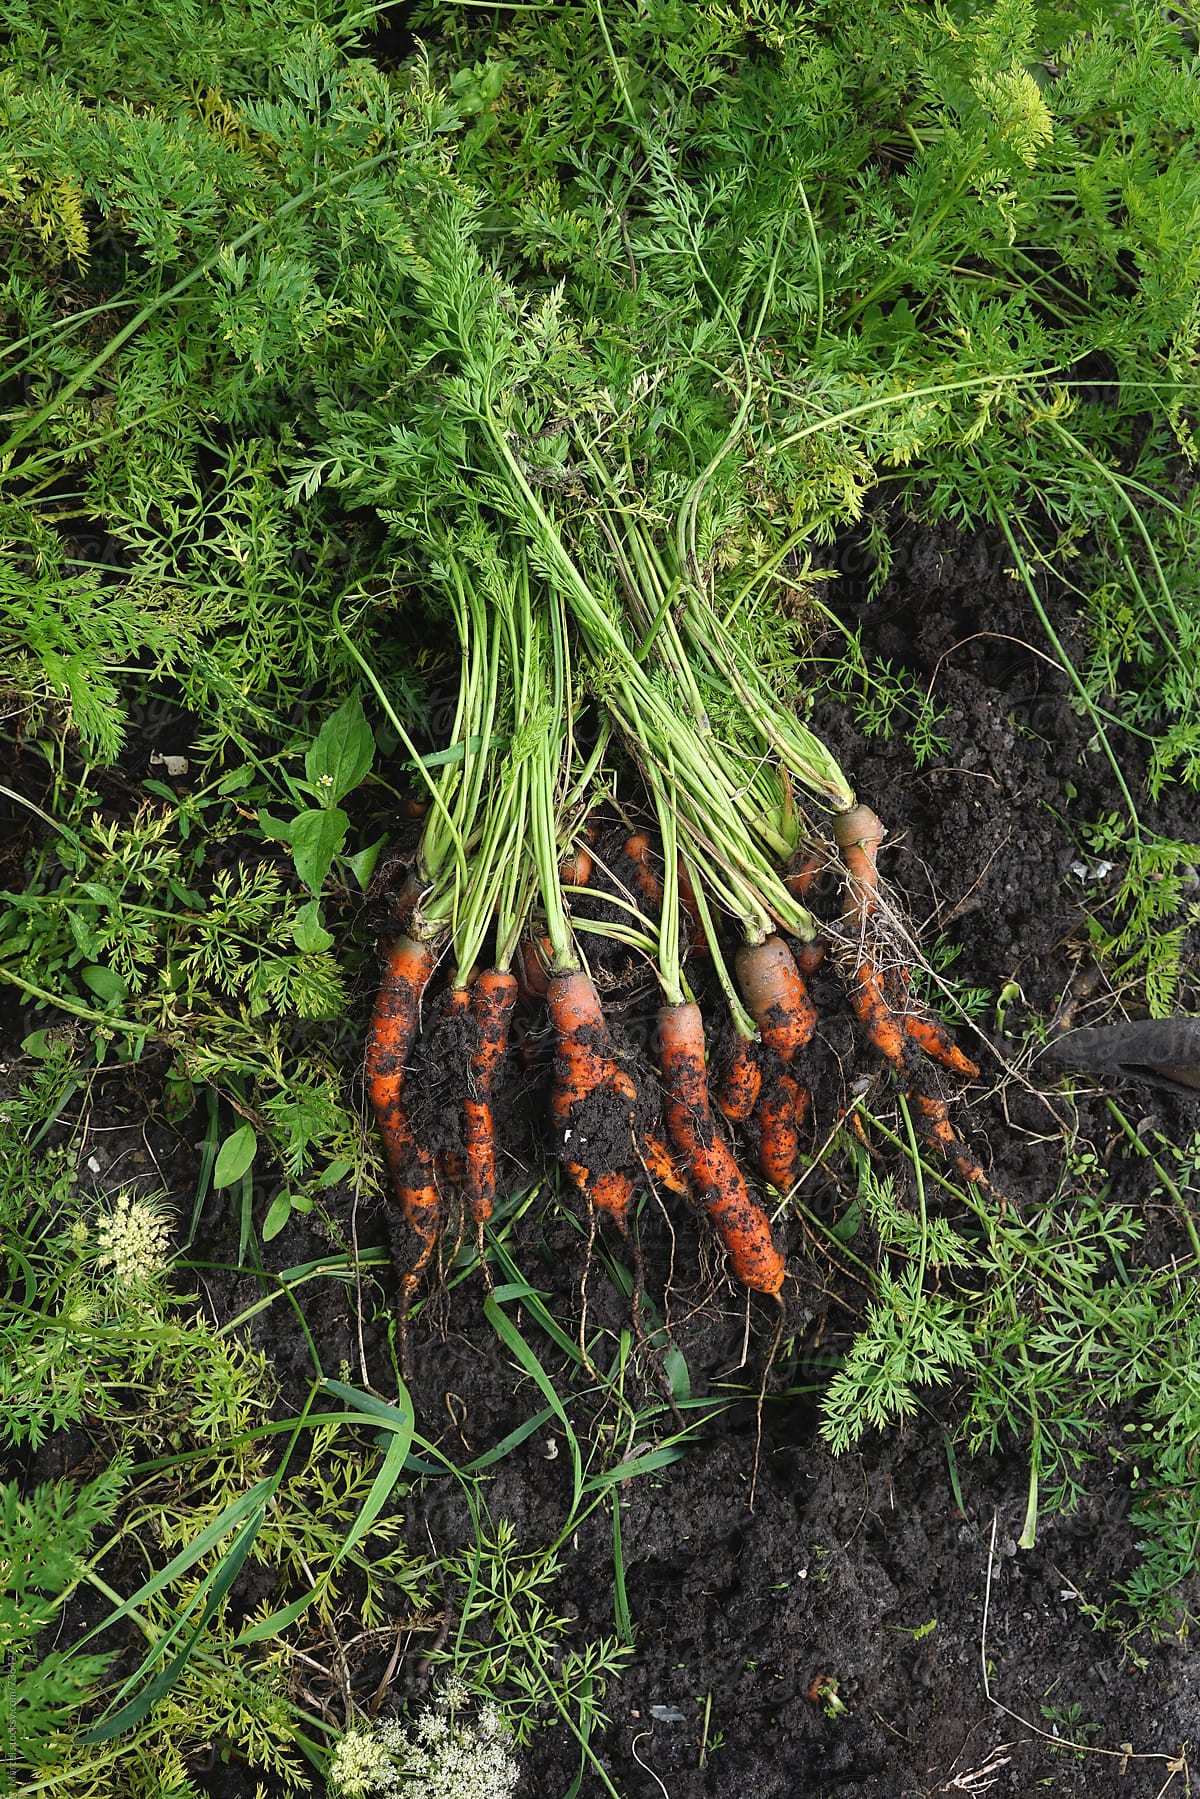 Carrots just harvested in a vegetable garden